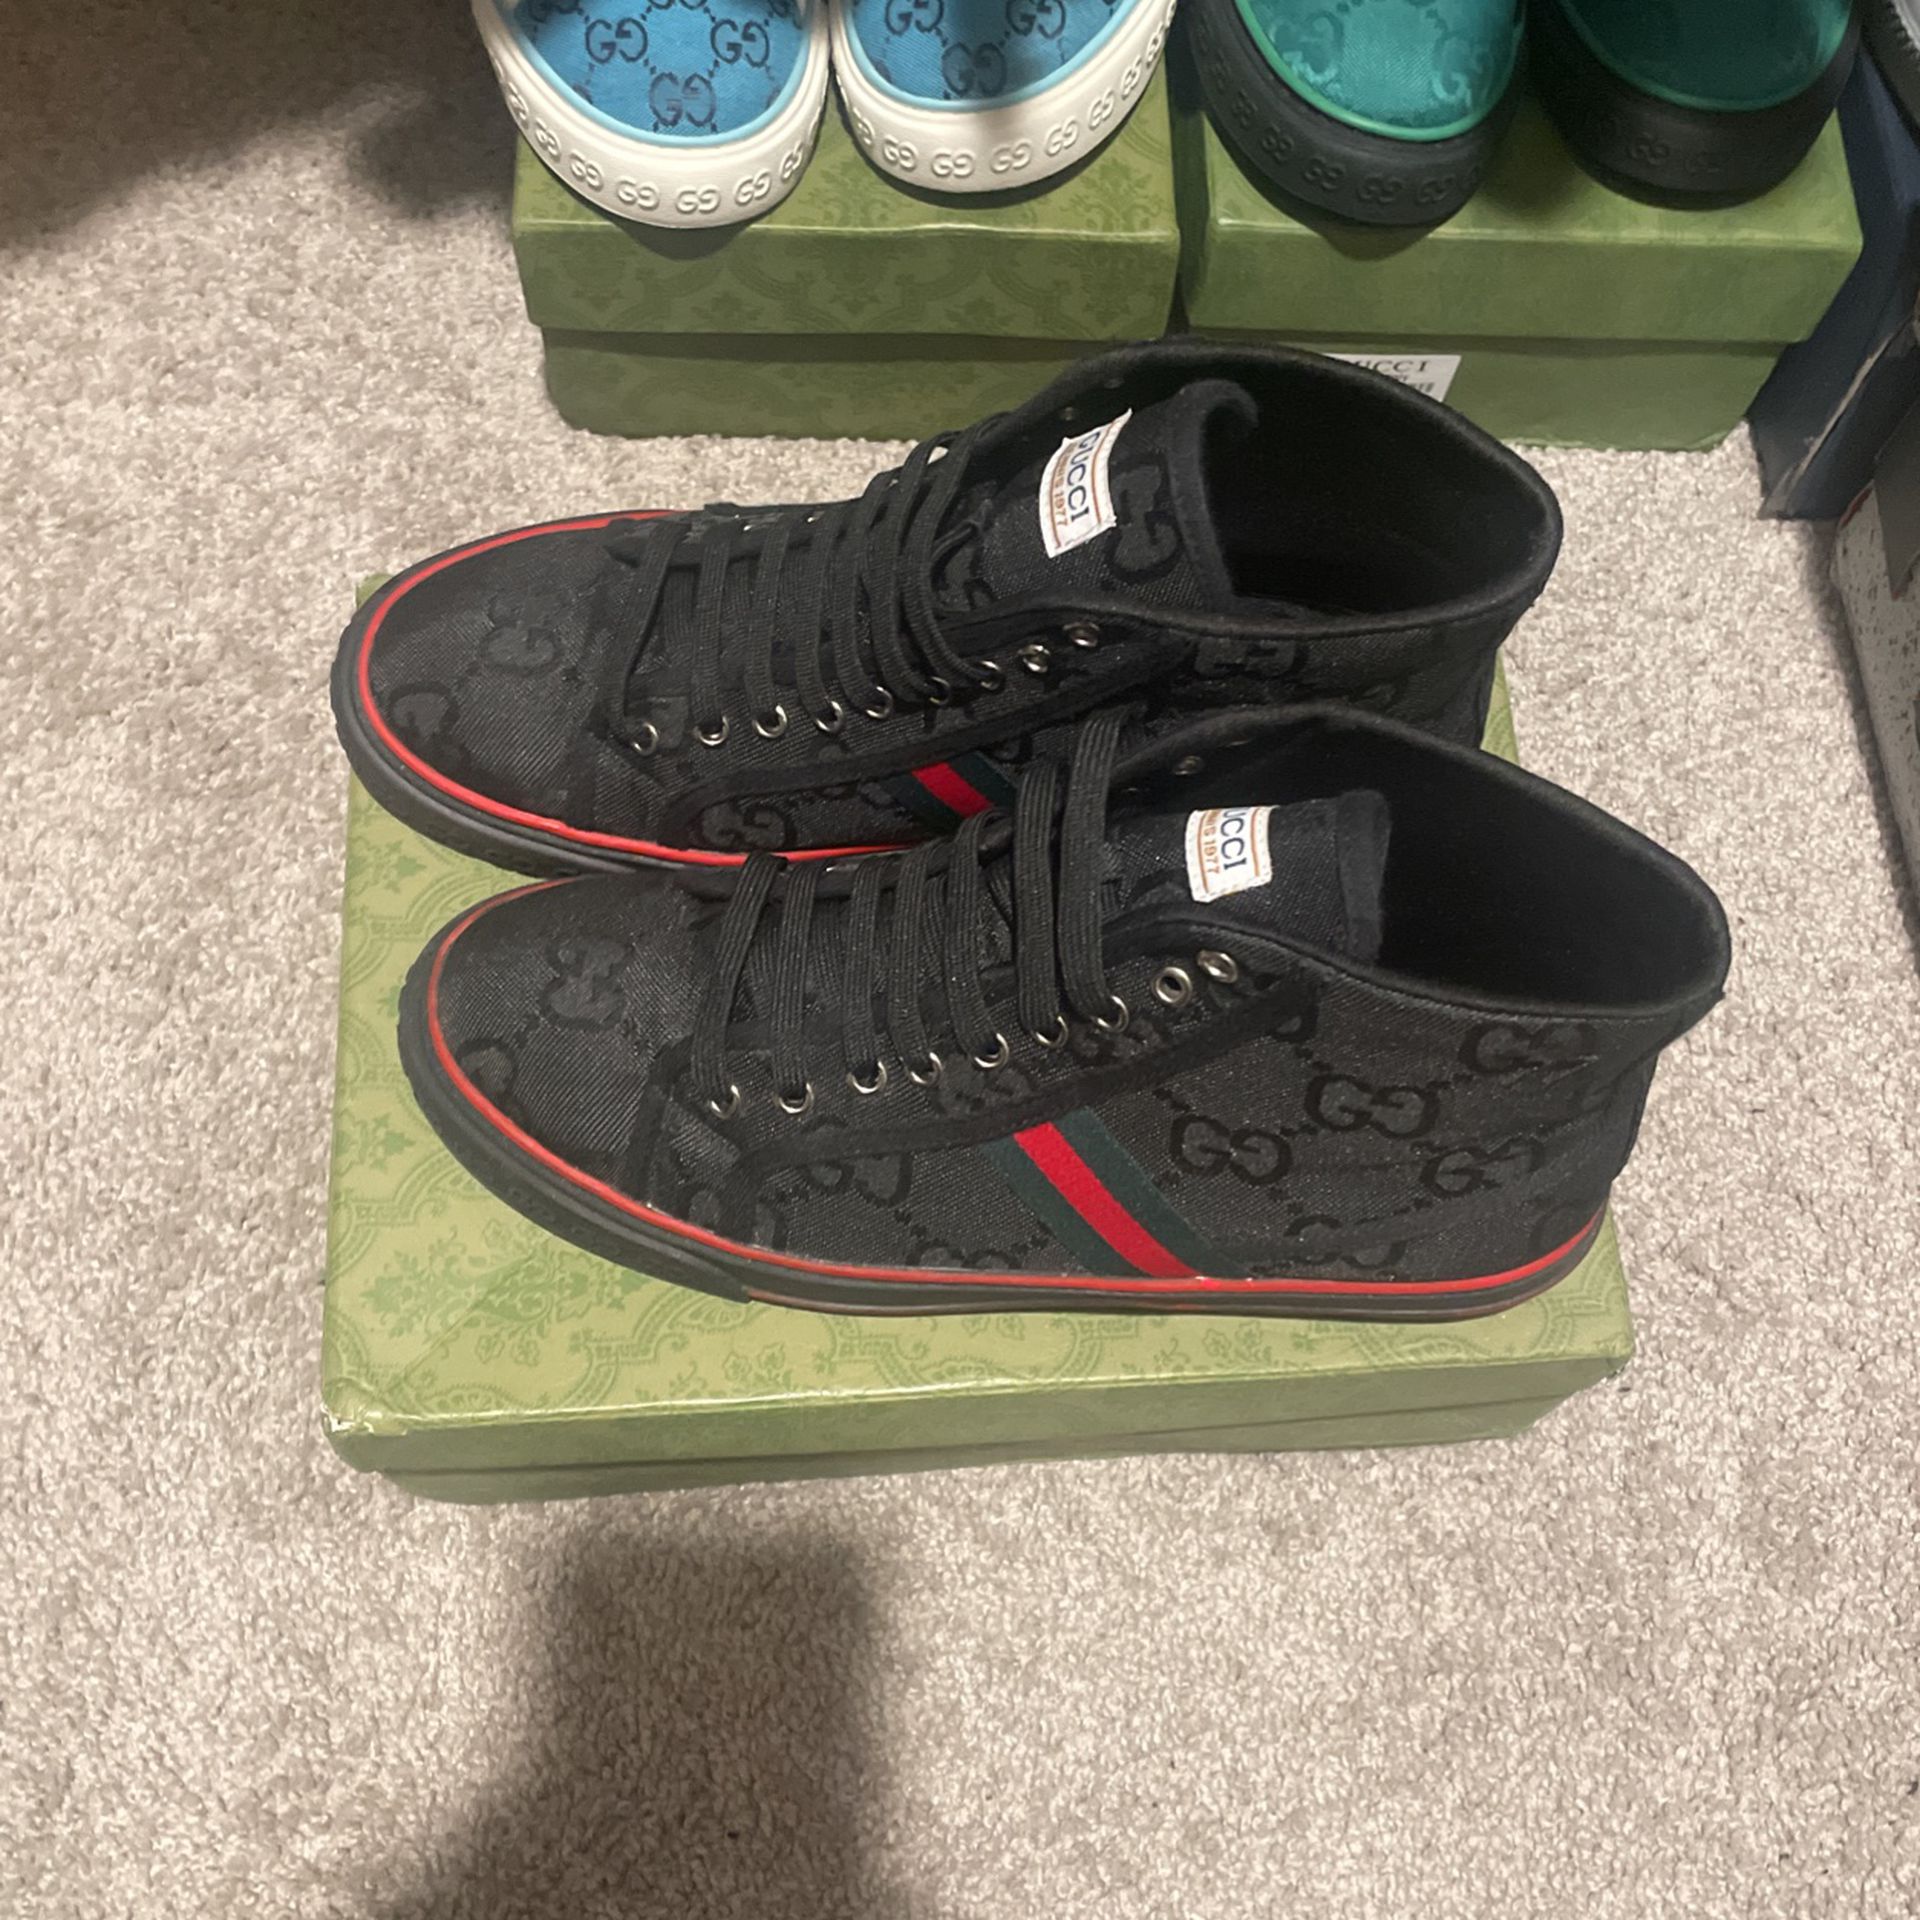 Men's Gucci Off The Grid High Top Sneaker